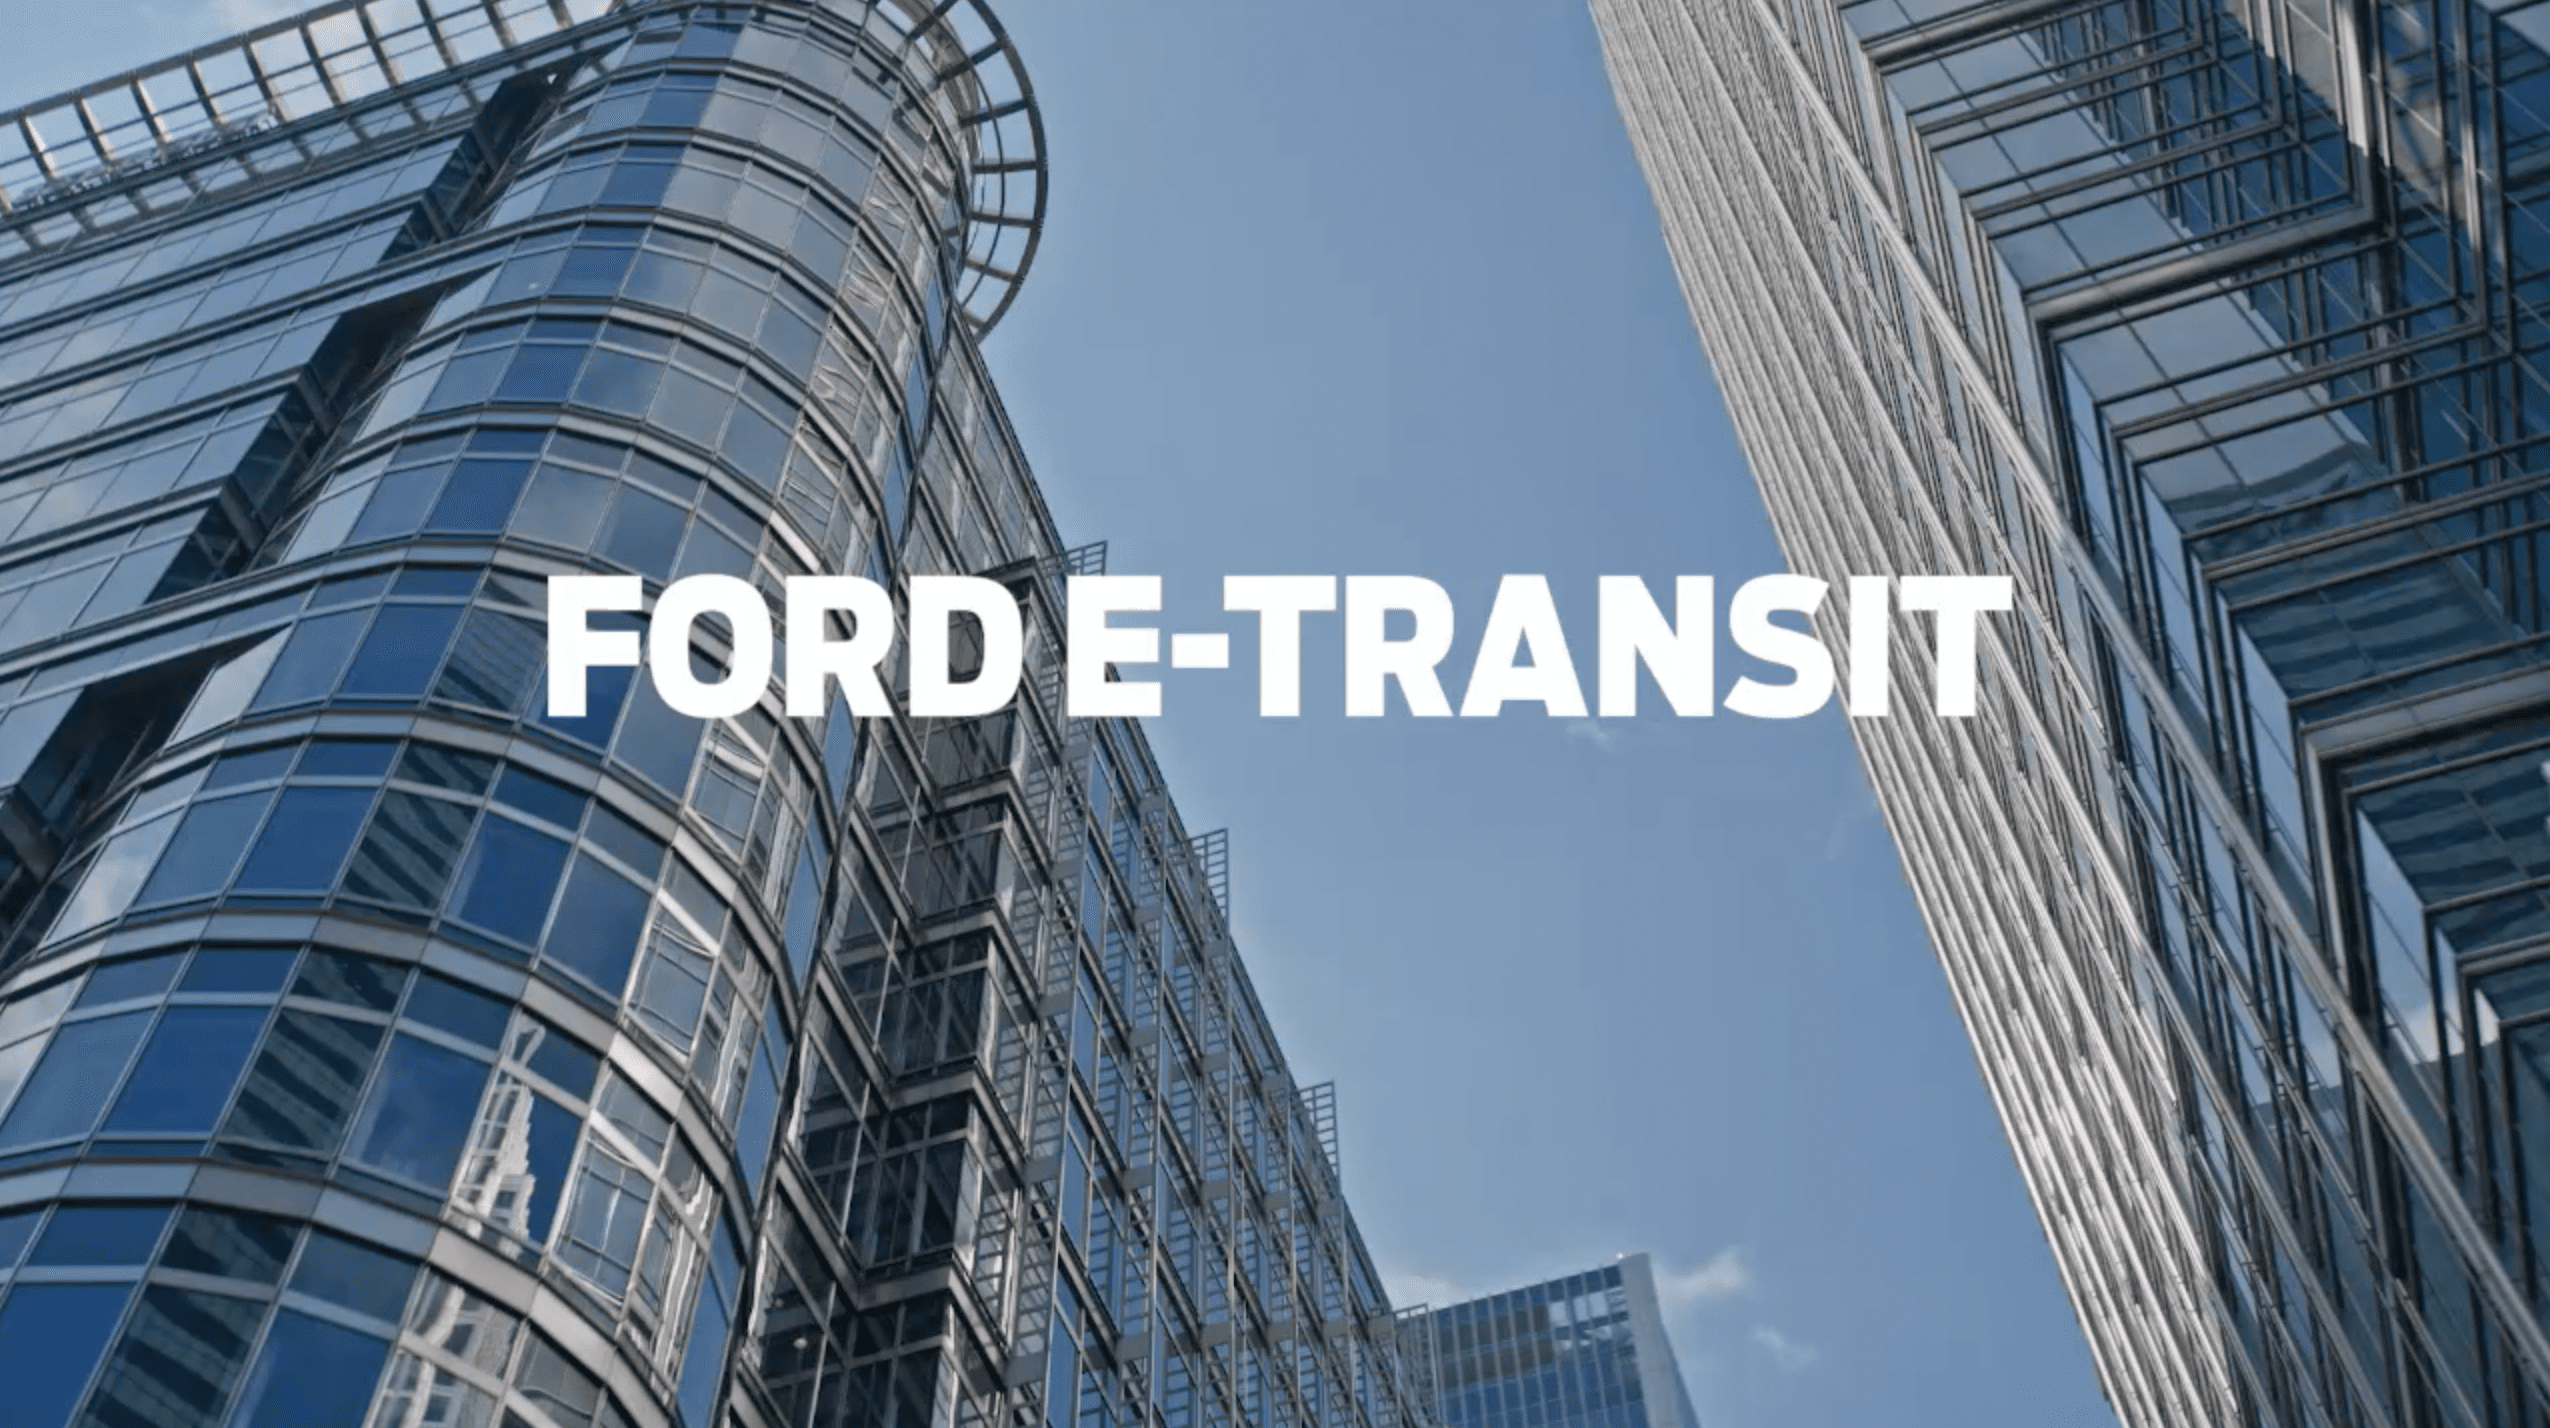 Ford E-Transit - Skies the limit